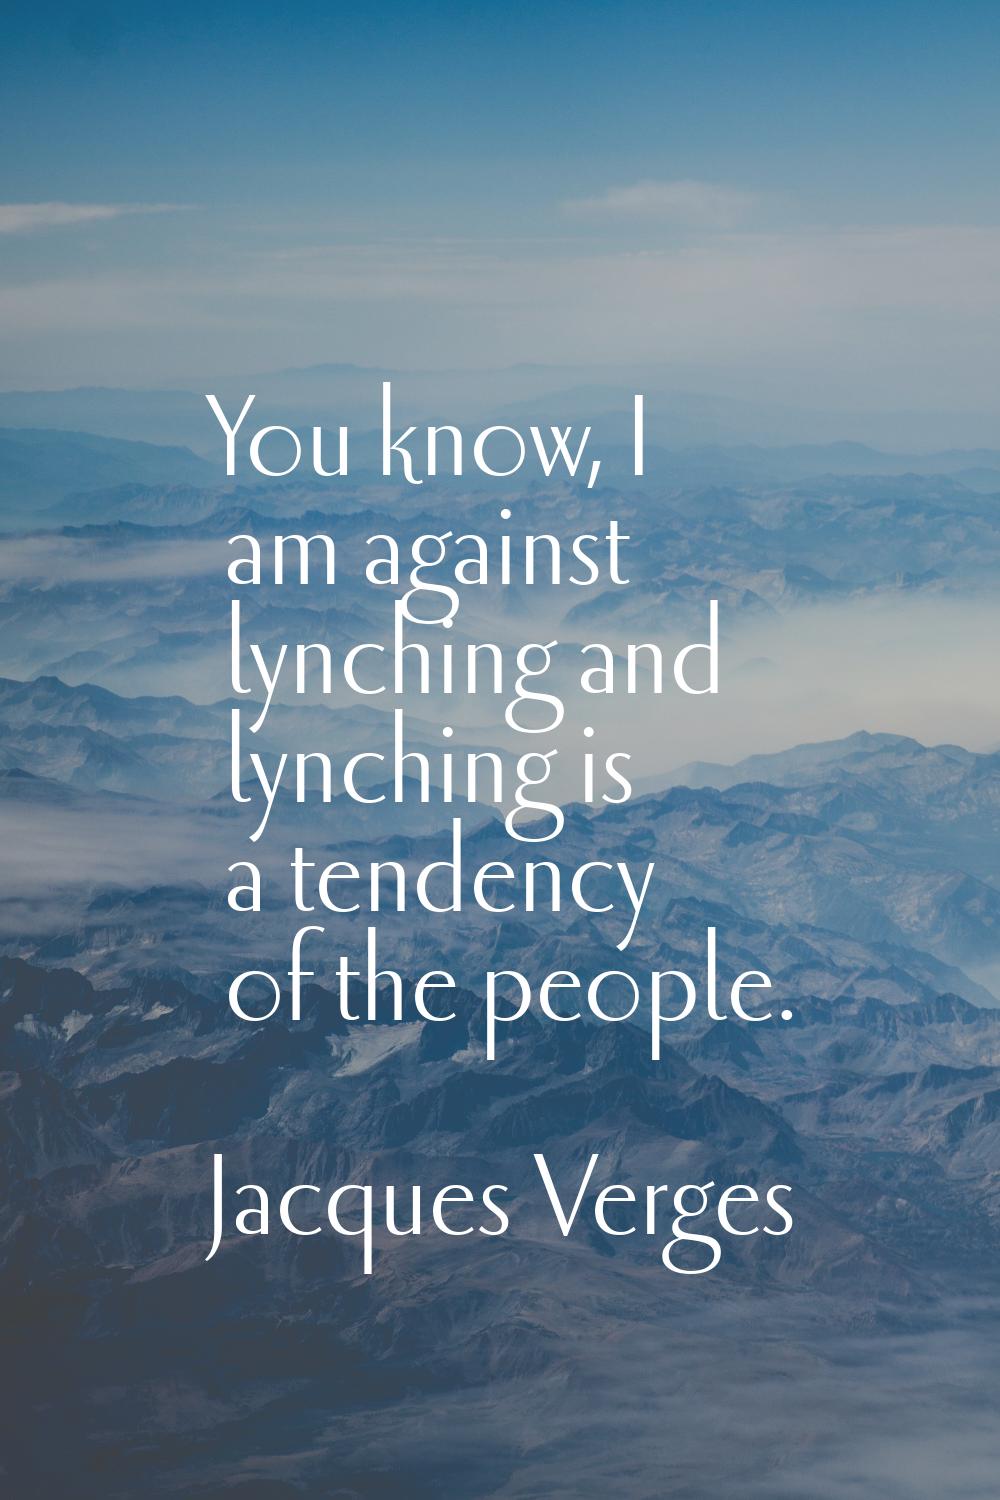 You know, I am against lynching and lynching is a tendency of the people.